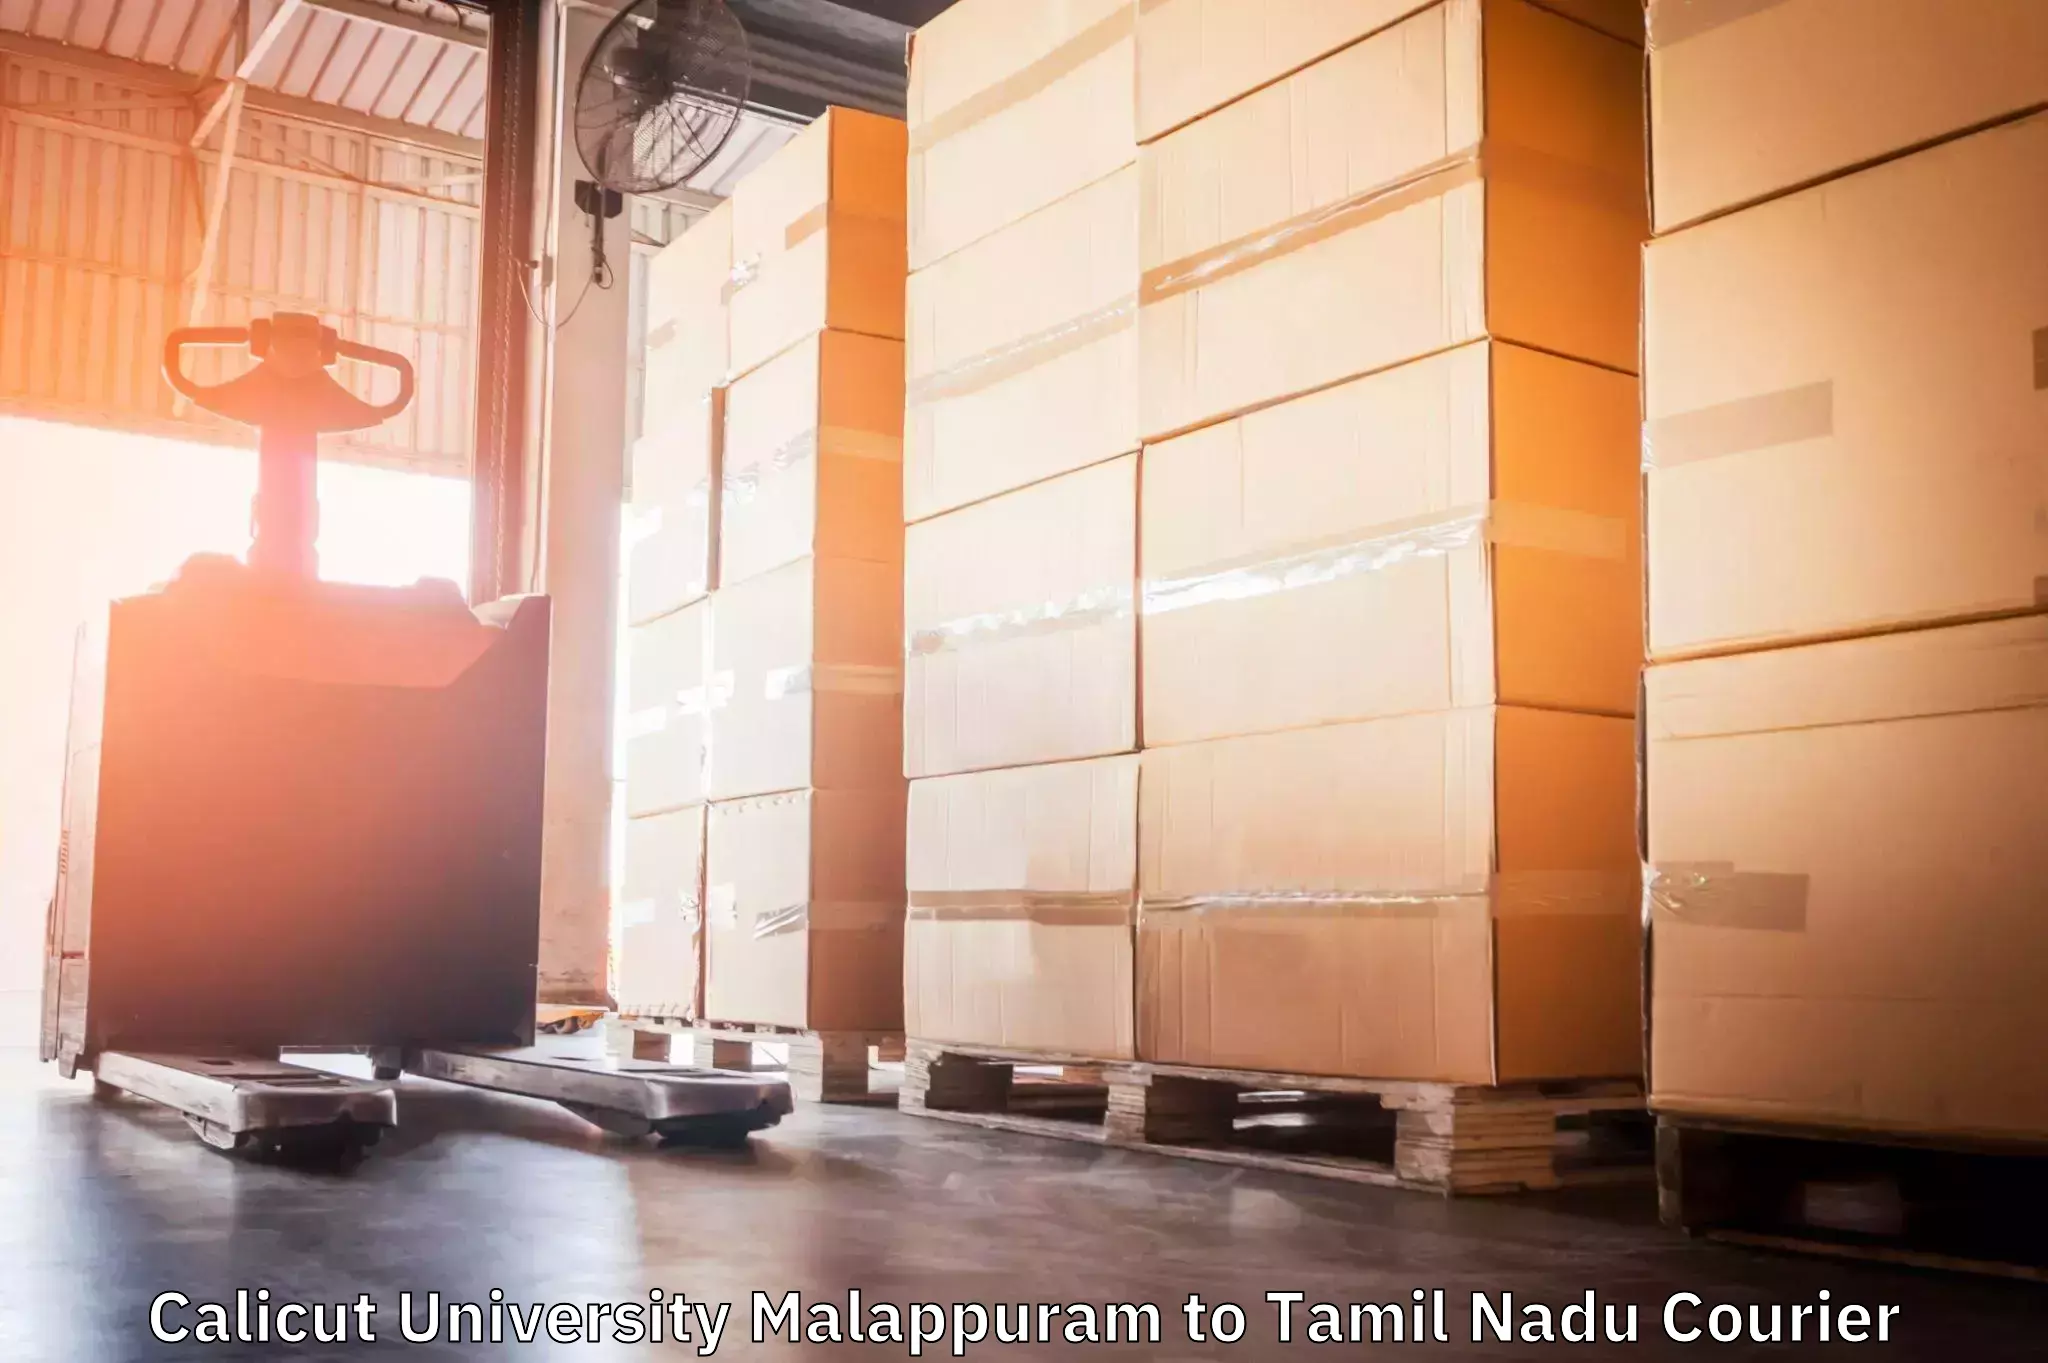 Small business couriers in Calicut University Malappuram to Nagercoil